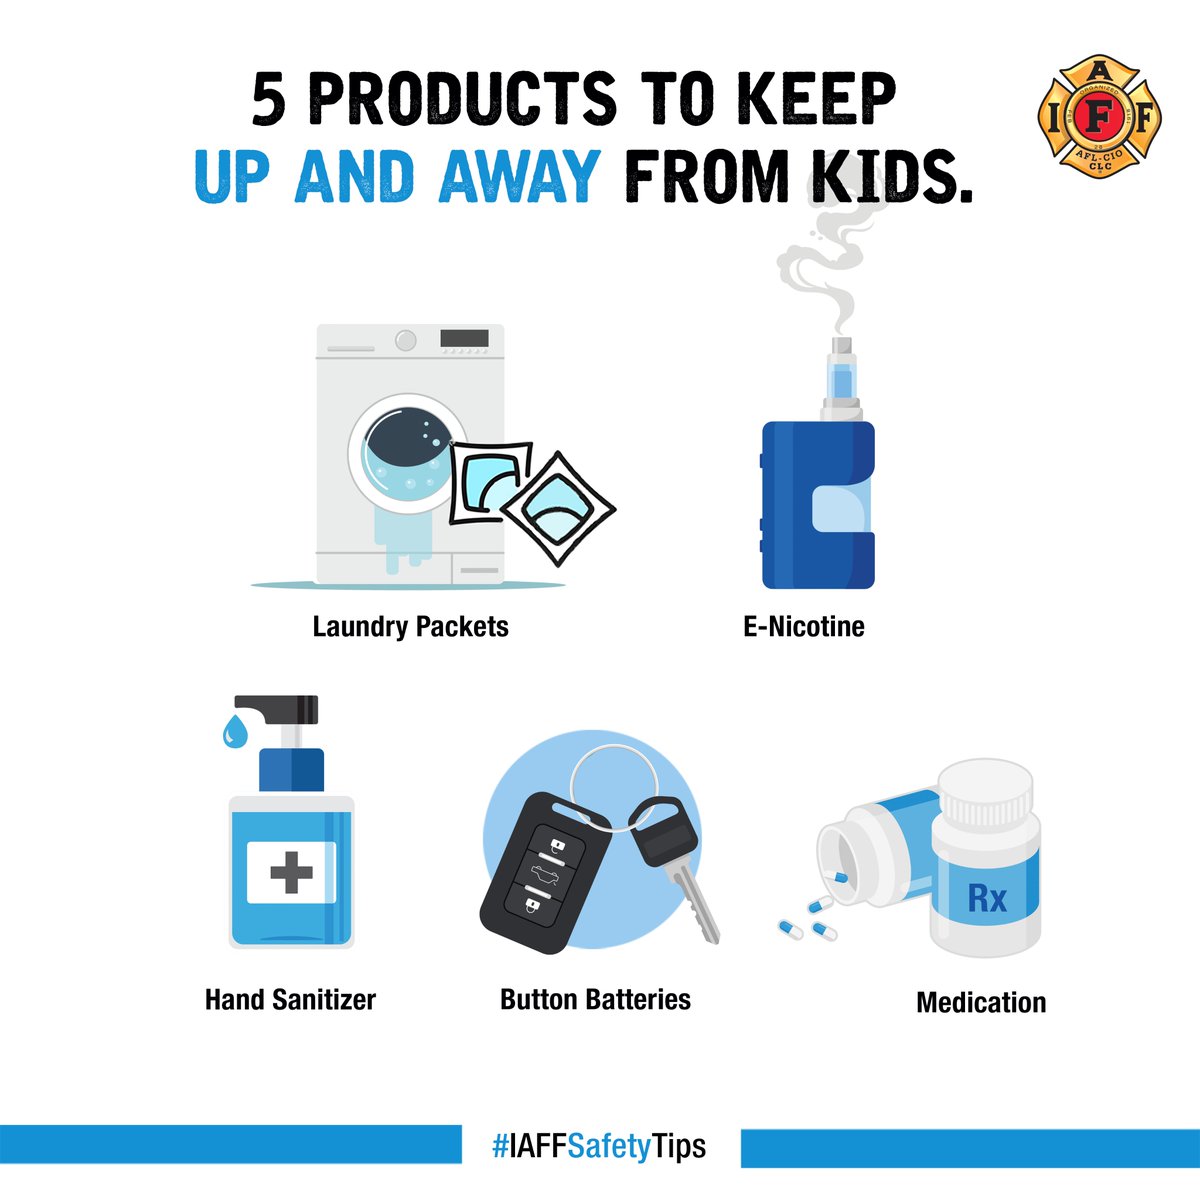 Children have a way of getting into everything and these items can be particularly dangerous: hand sanitizers, button batteries, laundry detergent packets, e-cigarettes and medications. For #NationalPoisonPreventionWeek we encourage you to keep your children safe. #IAFFSafetyTips